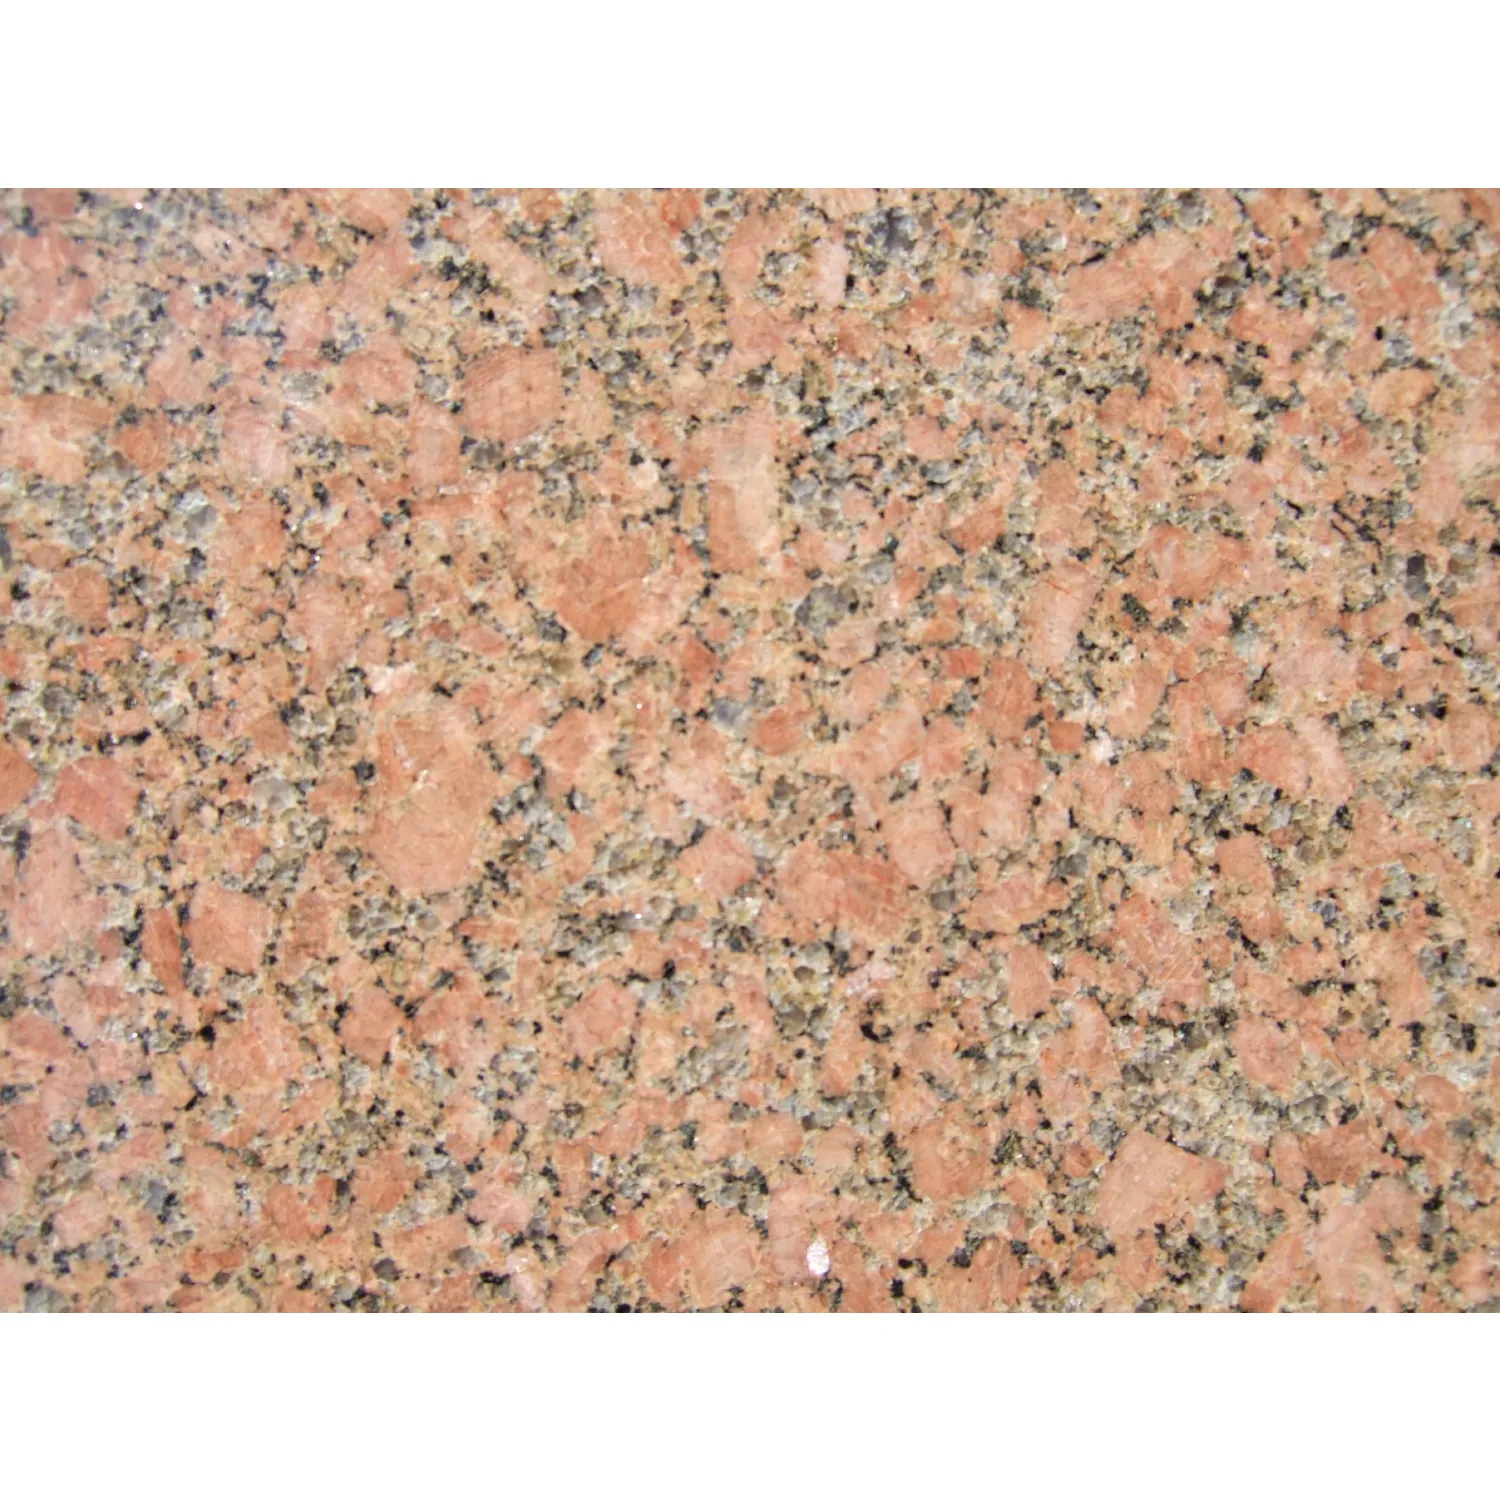 High Quality Granite Tile and Granite Slab Polished Granite Stone For Counter Top/ Kitchen